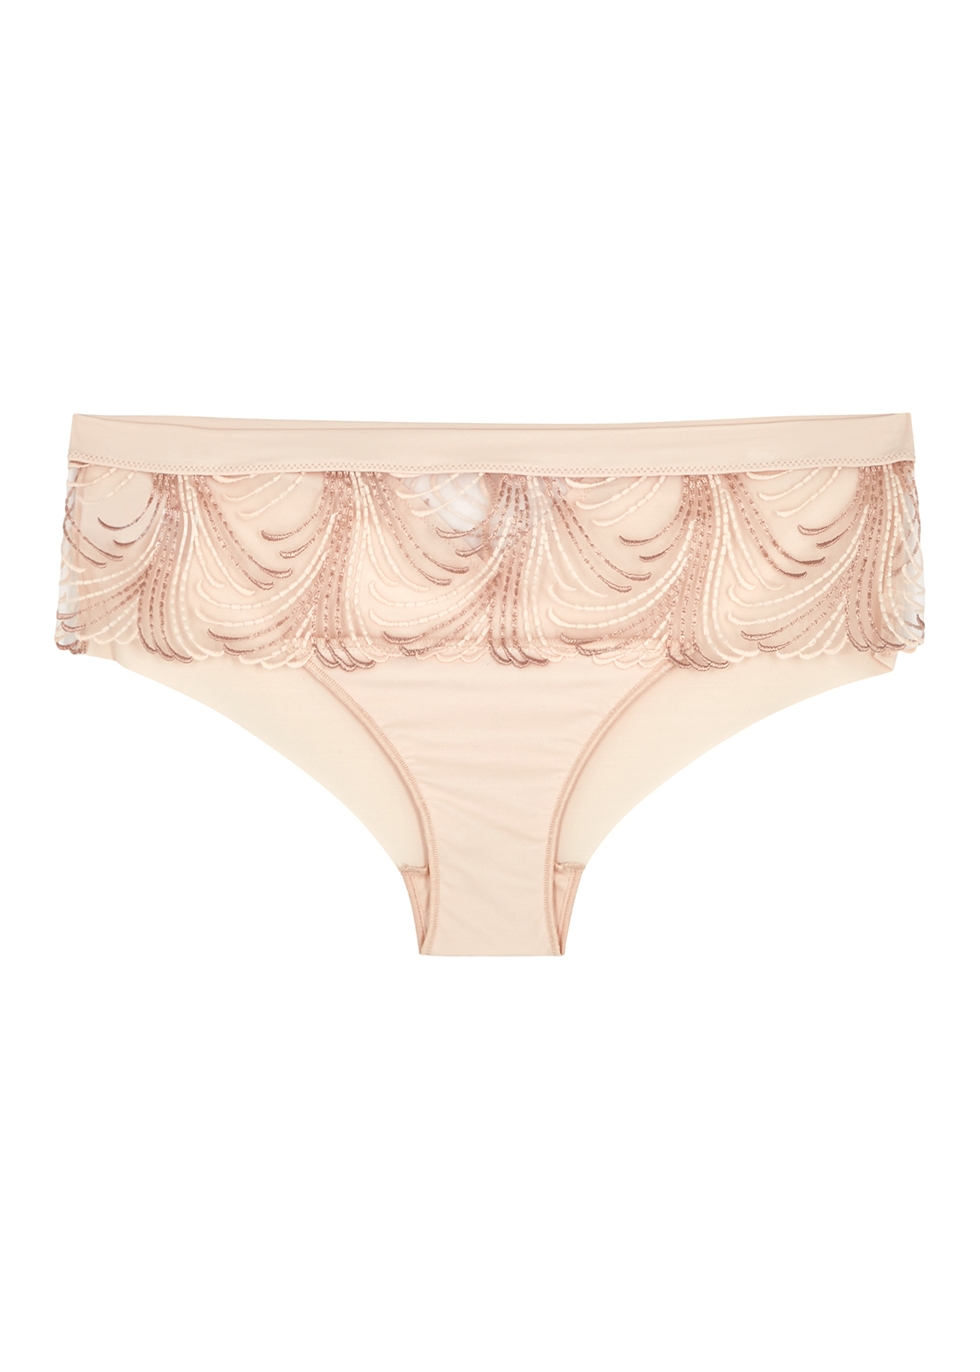 Nuance blush embroidered briefs